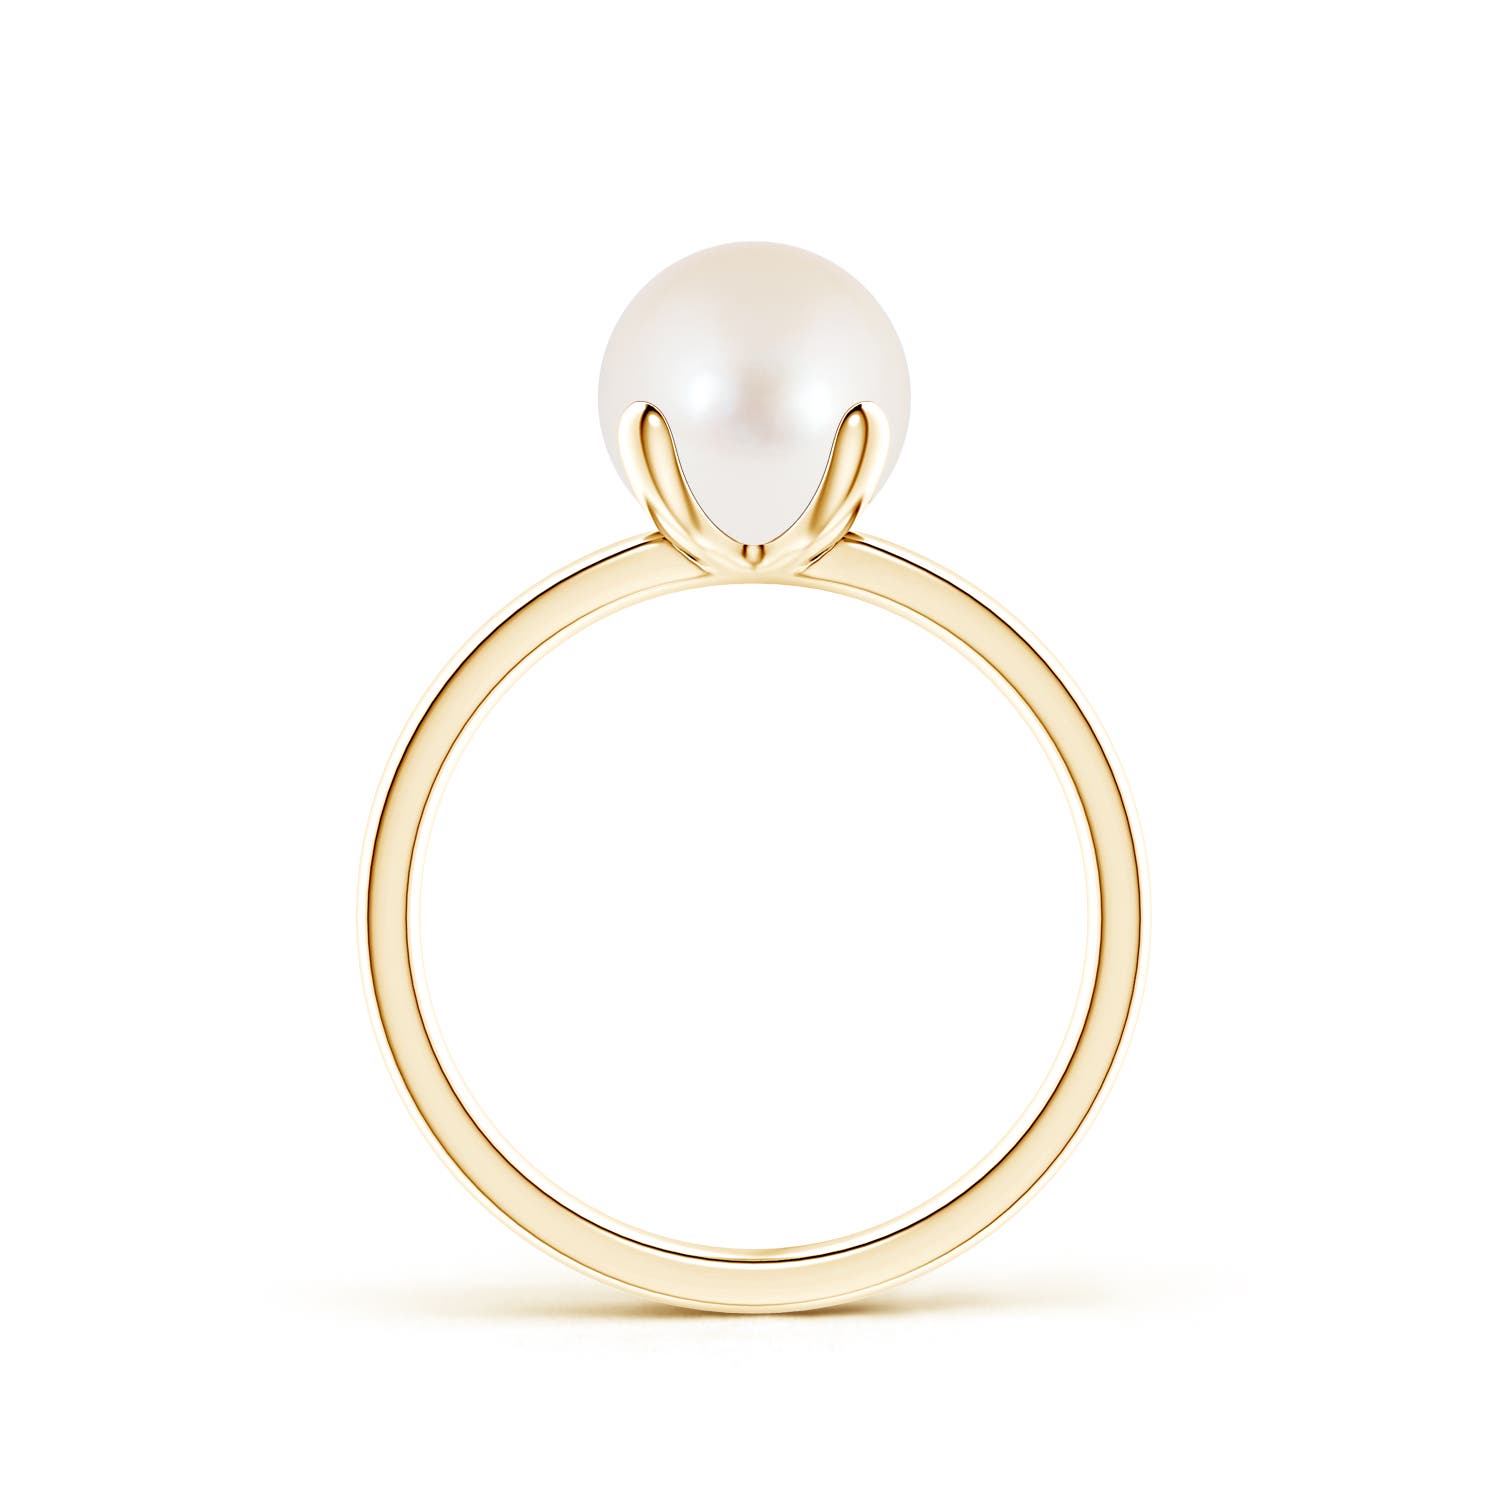 AAA / 3.7 CT / 14 KT Yellow Gold